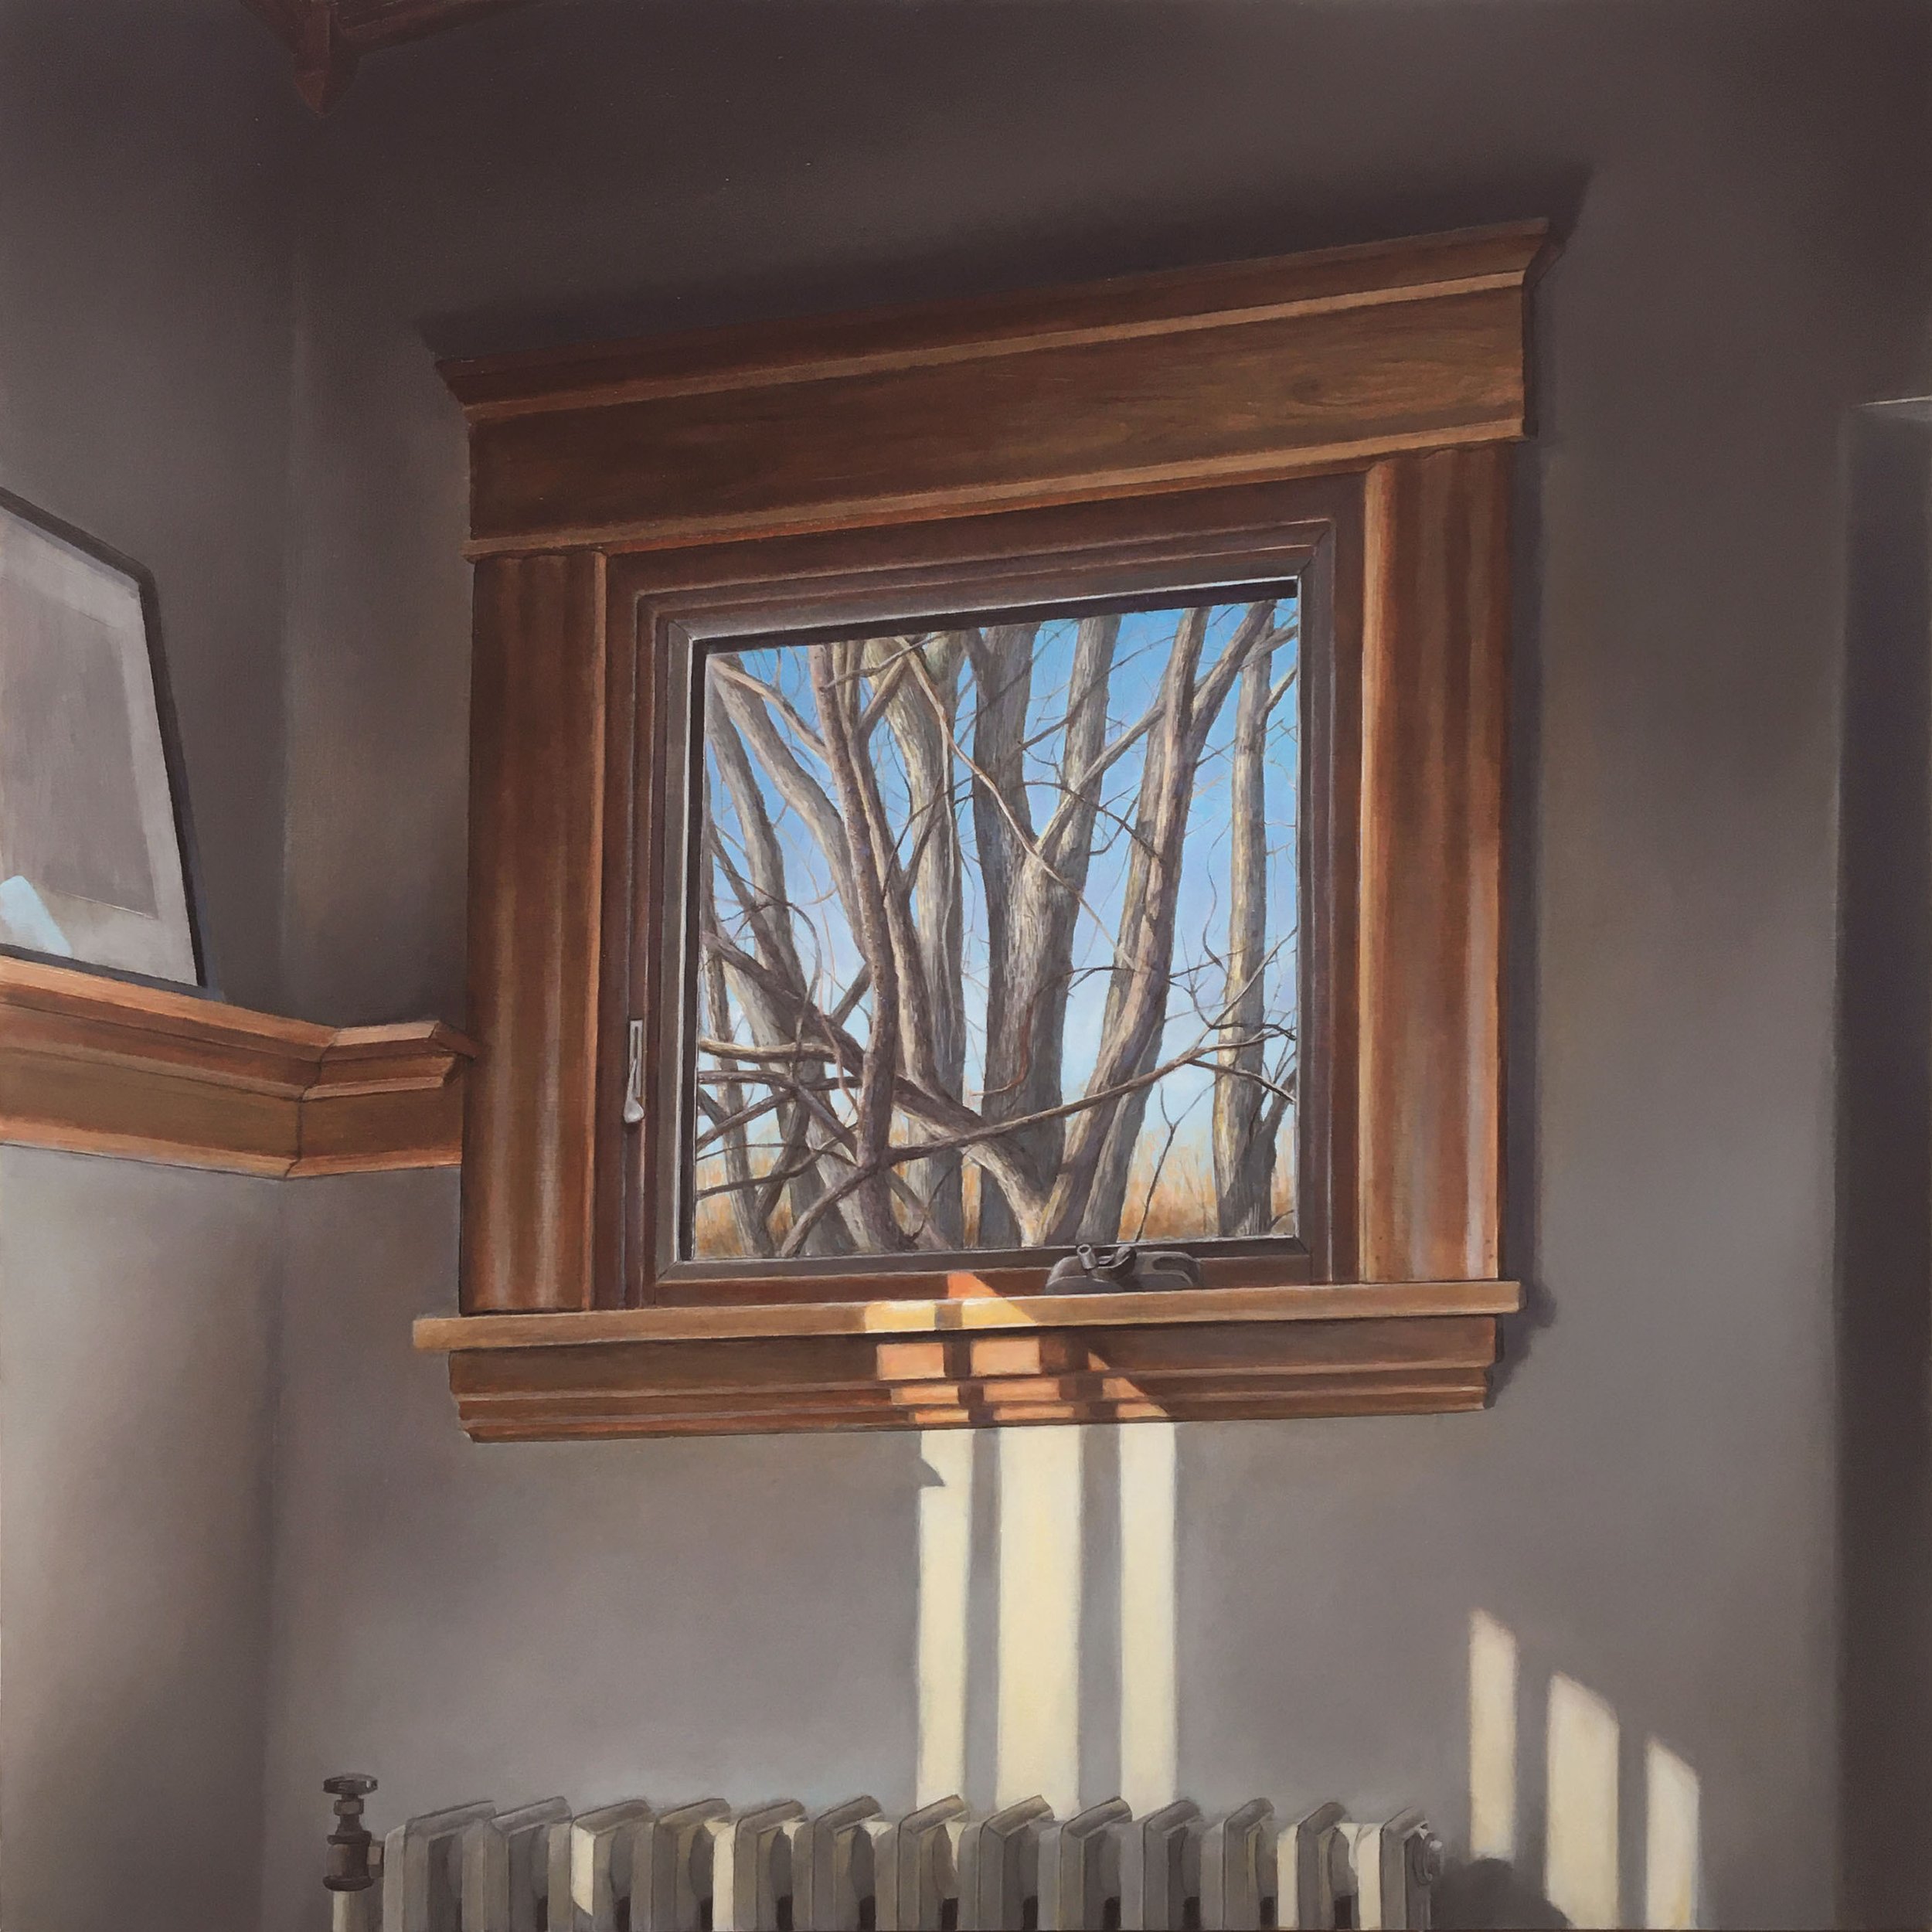   Morning Window   2022  Oil on panel  24 x 24 inches   